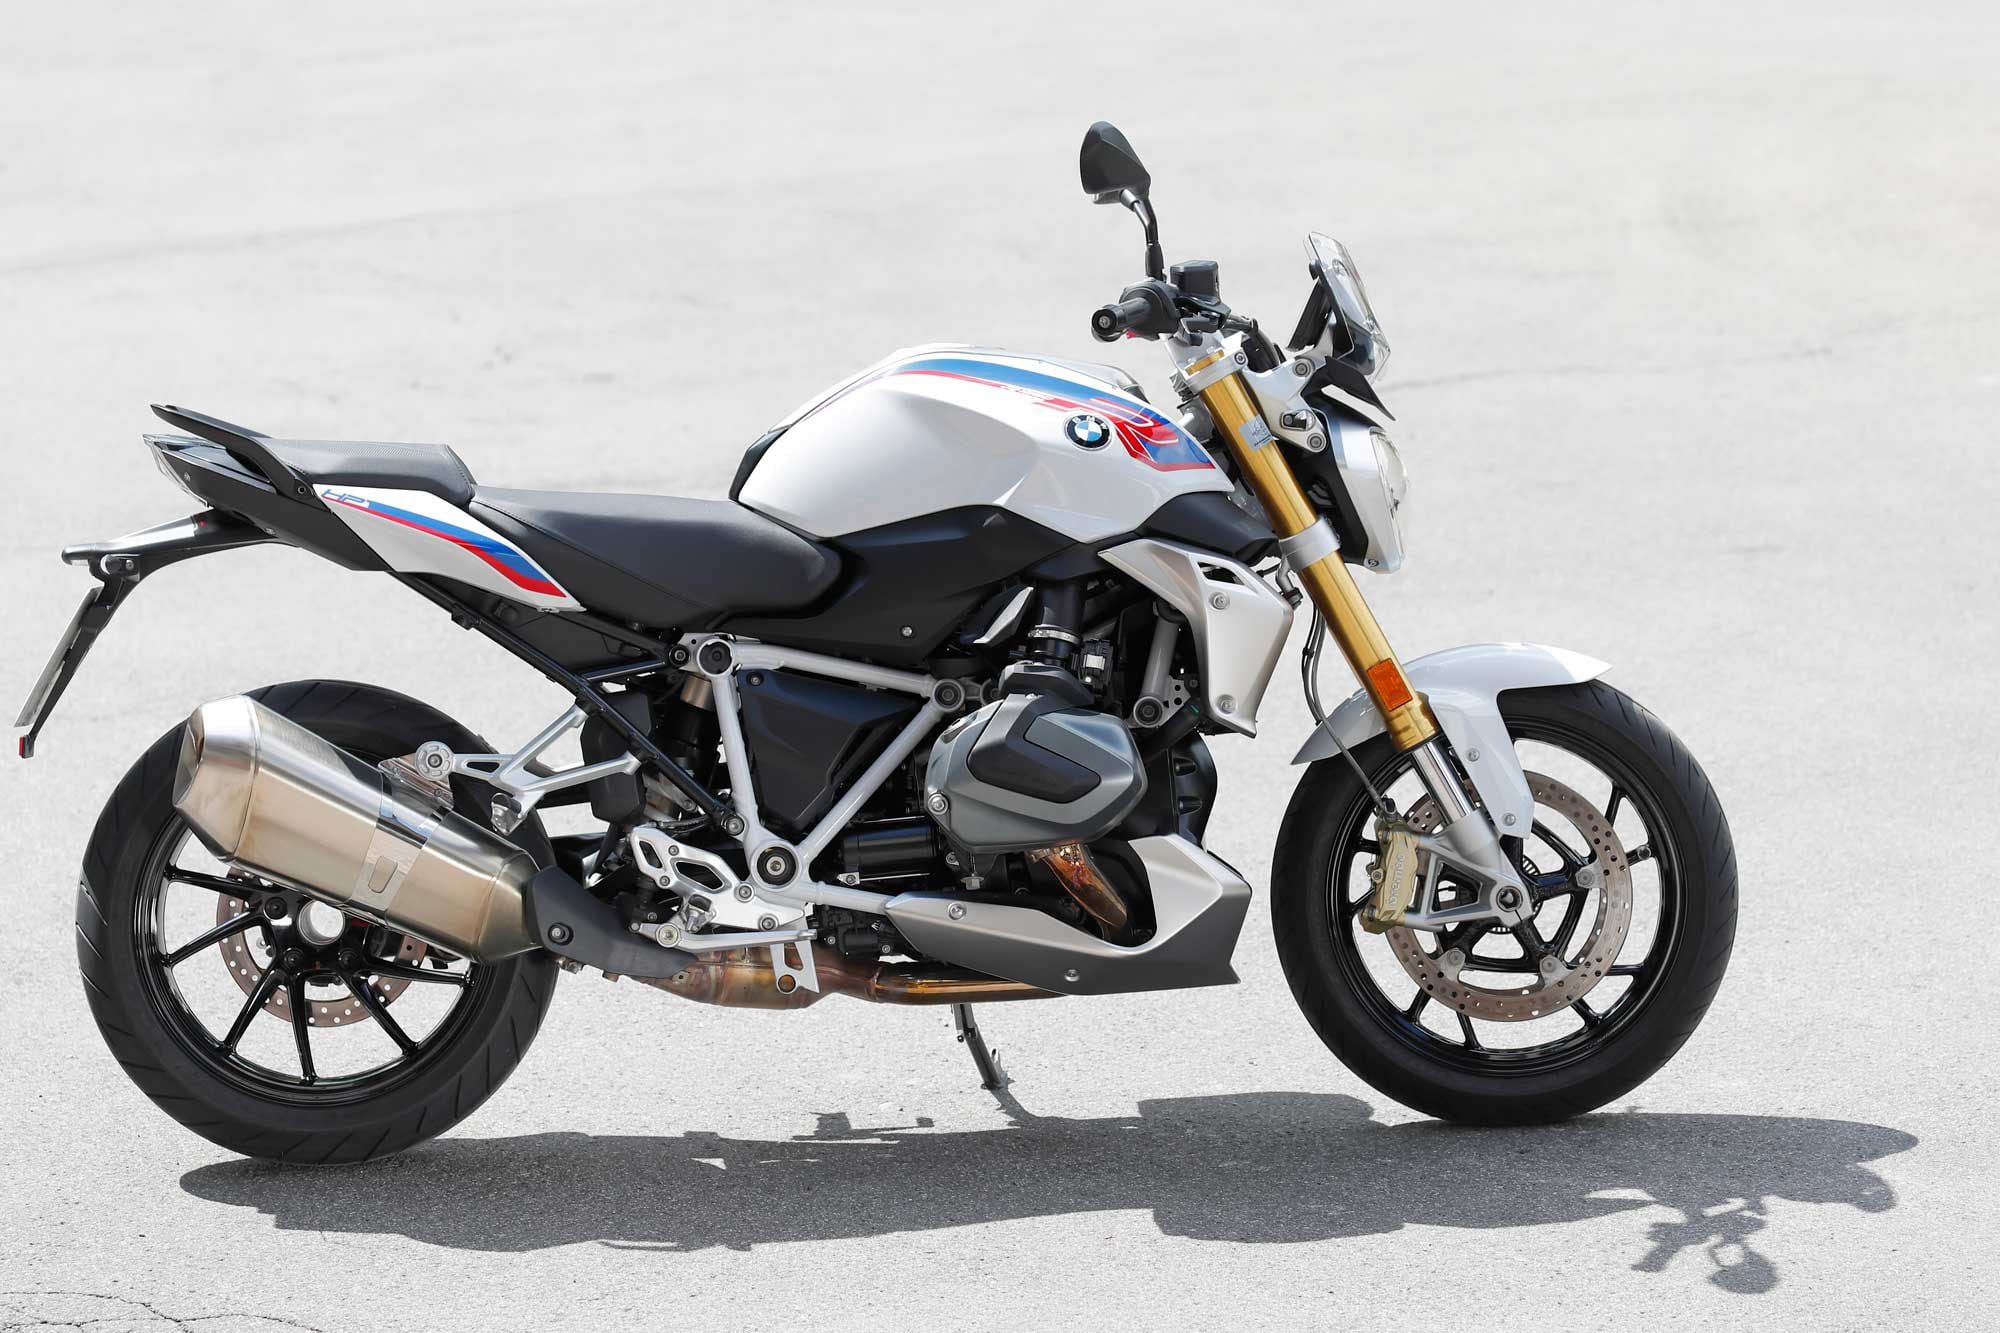 Documents show that the BMW R 1250 R is also getting minor updates for 2023.